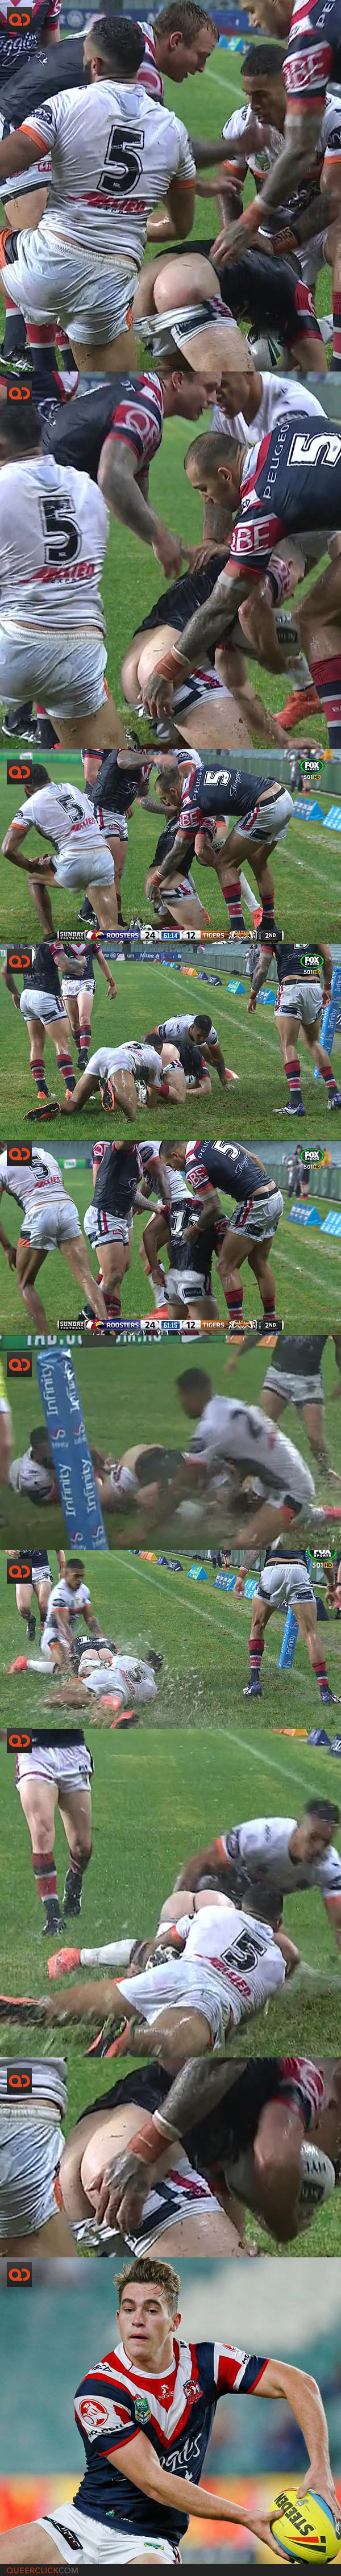 qc-rugby_players_sam_burgess_and_connor_watson_butts_exposed_during_their_matches-collage04